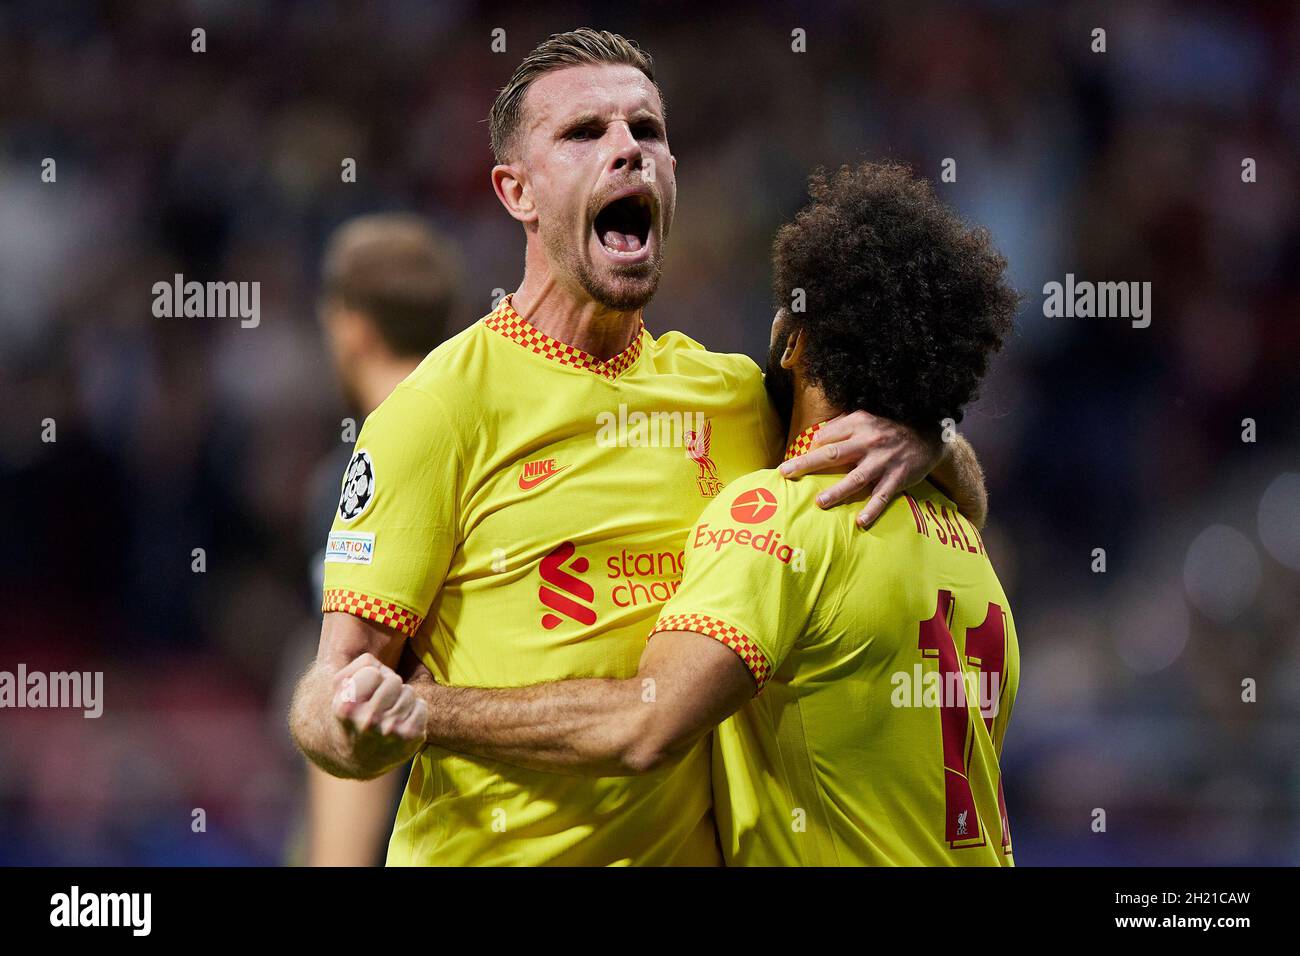 Madrid, Madrid, Spain. 19th Oct, 2021. MOHAMED SALAH and JORDAN HENDERSON  of Liverpool FC celebrating during the Champions League football match  between Atletico de Madrid and Liverpool FC at Wanda Metropolitano Stadium